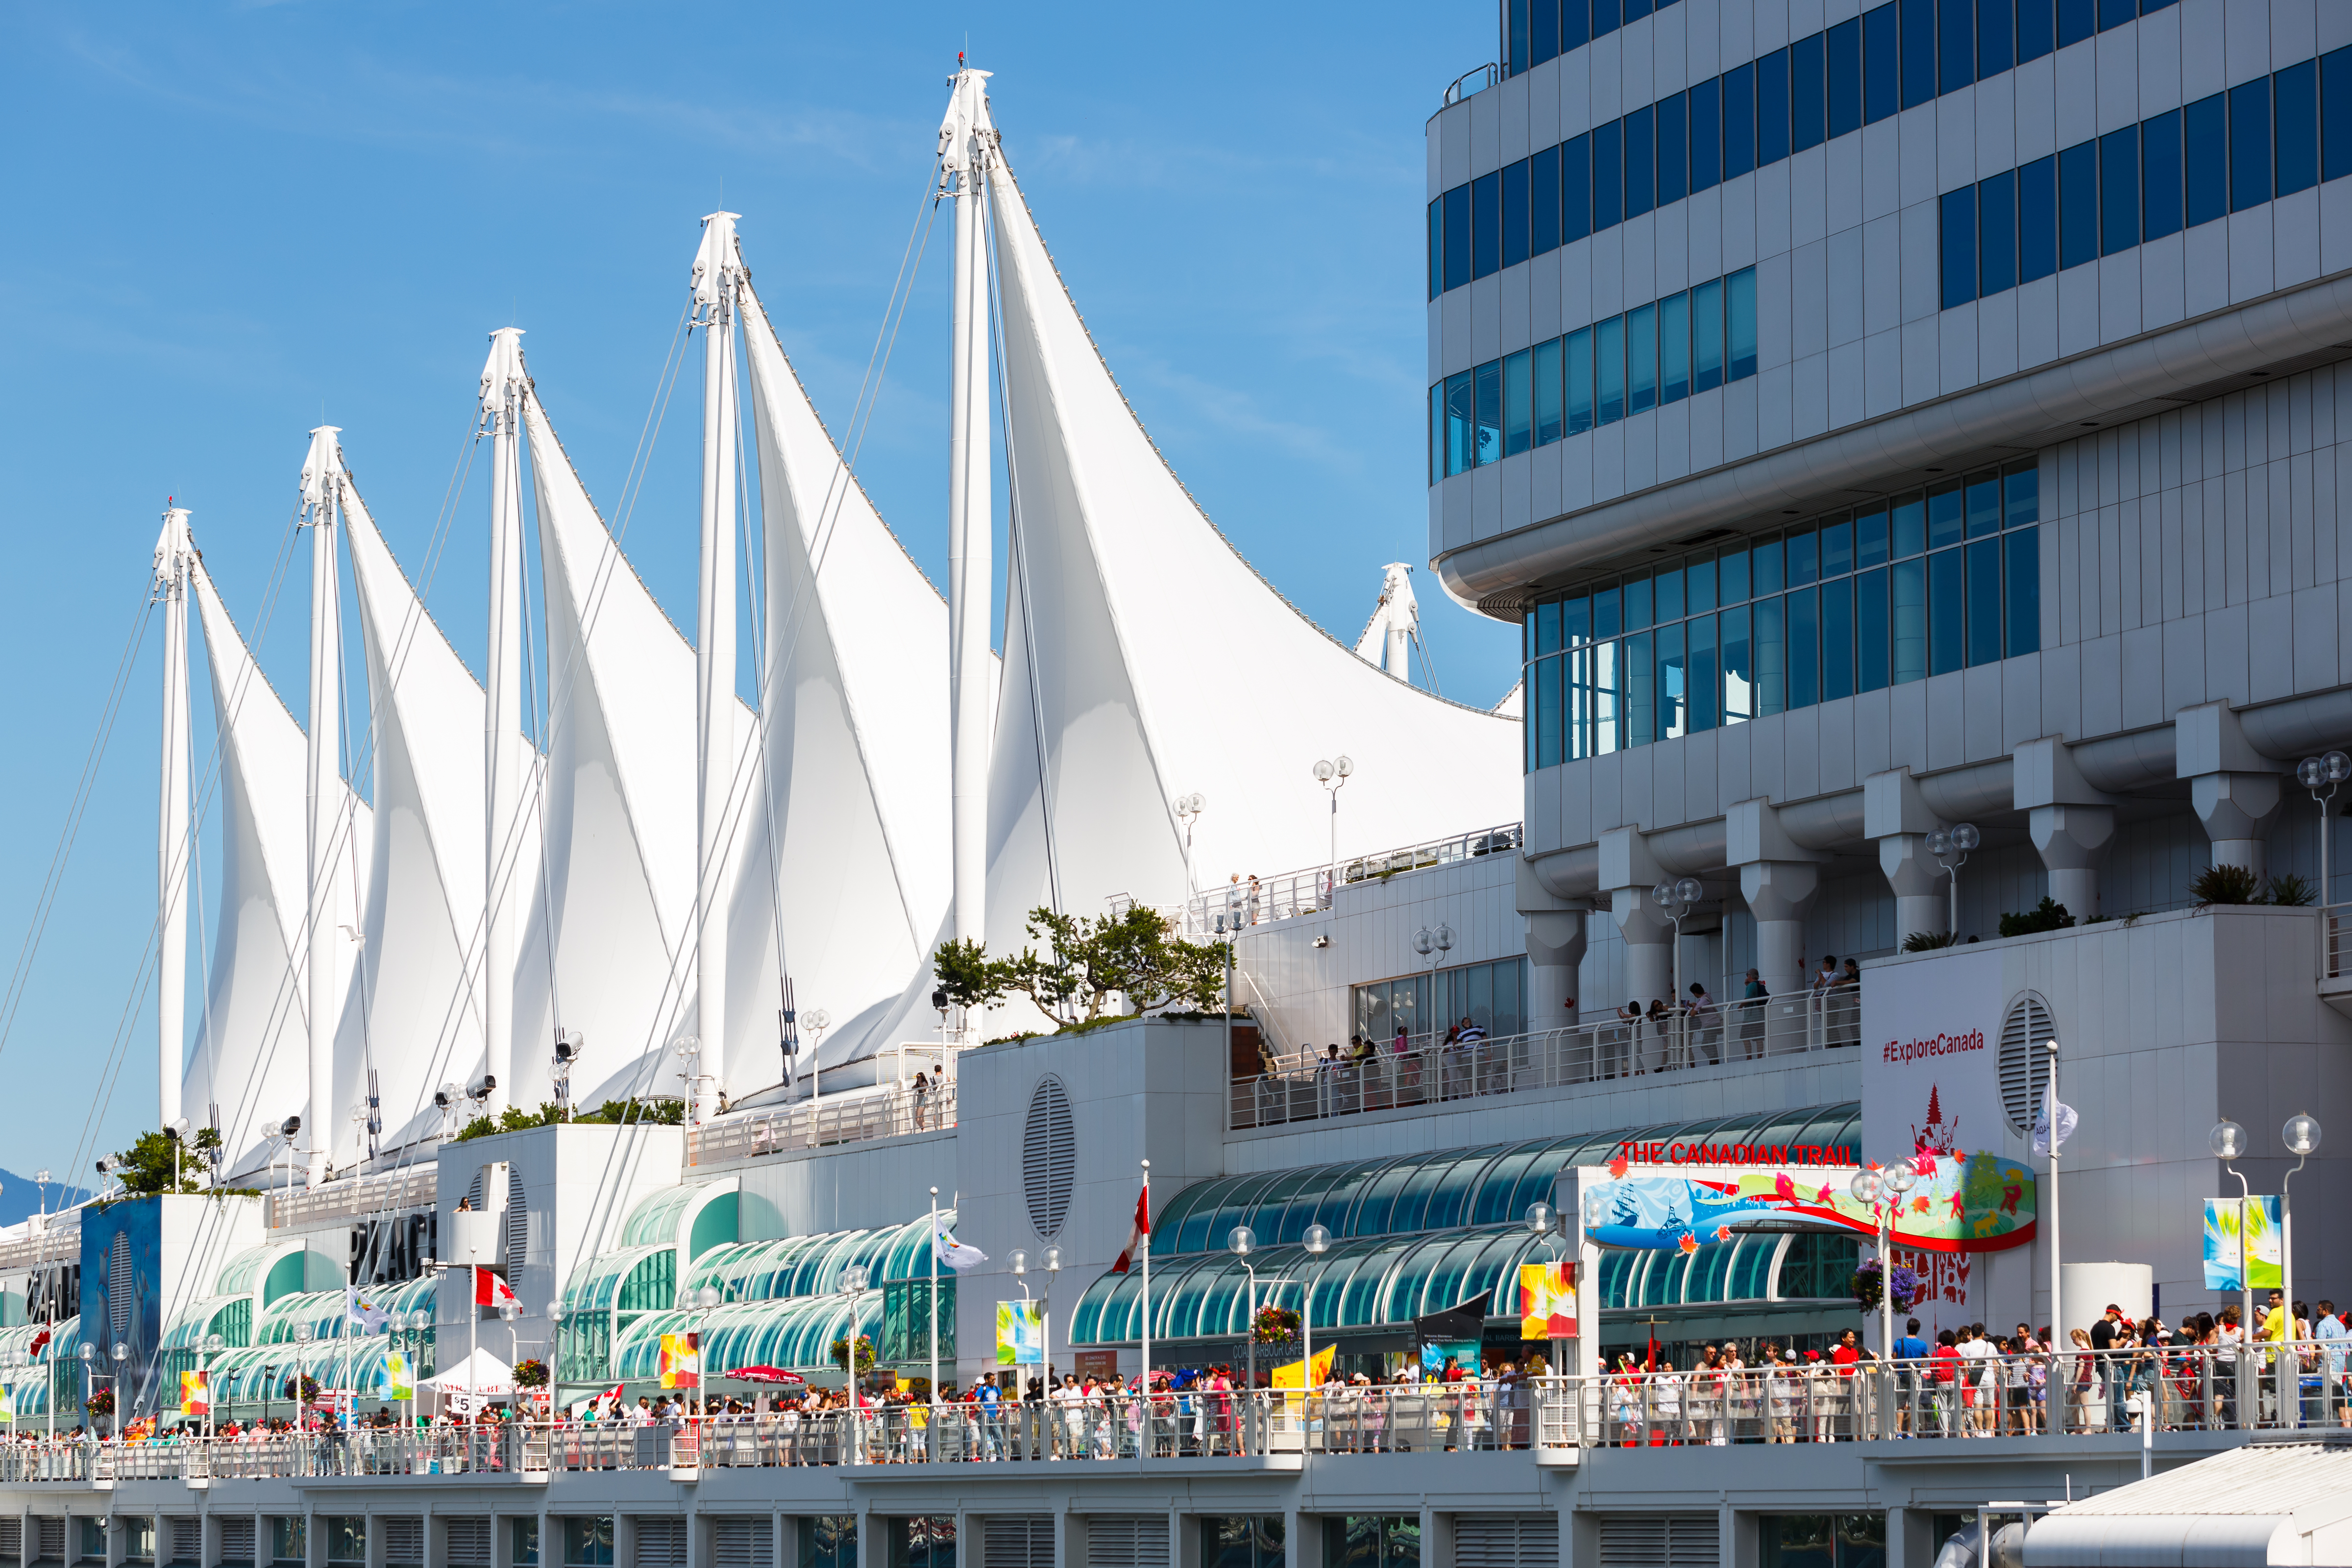 Canada Place – Port of Vancouver